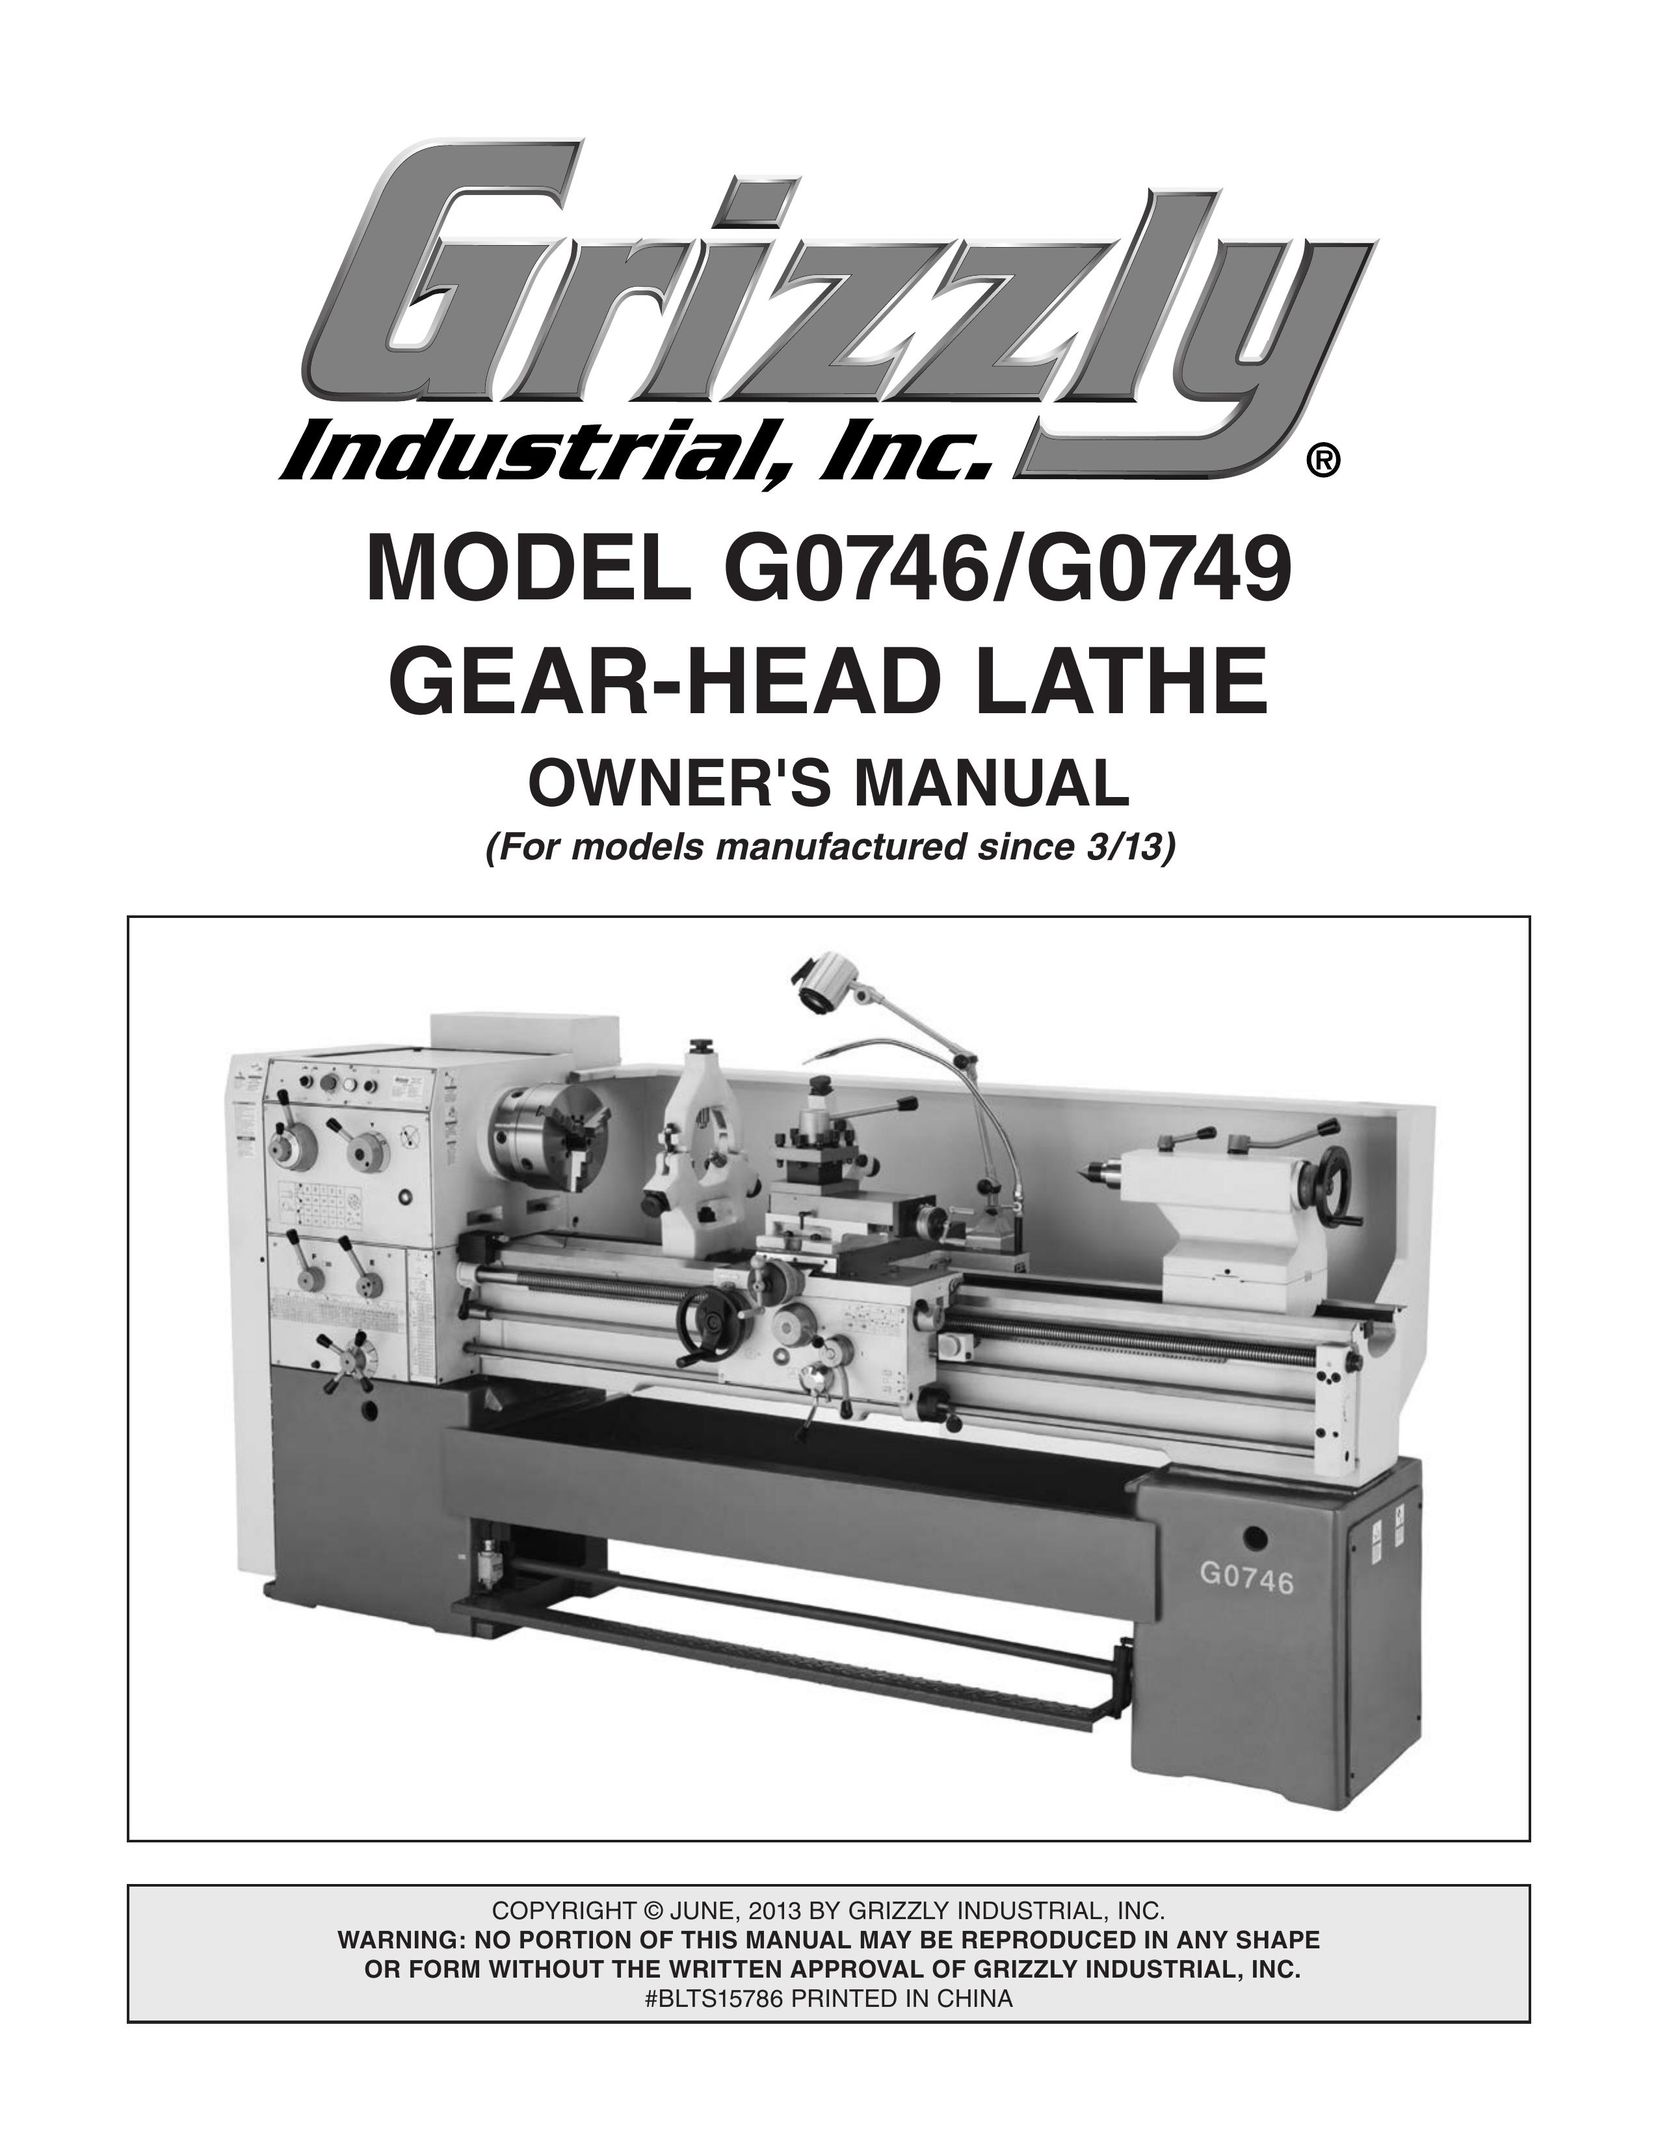 Grizzly g0746 Lathe User Manual